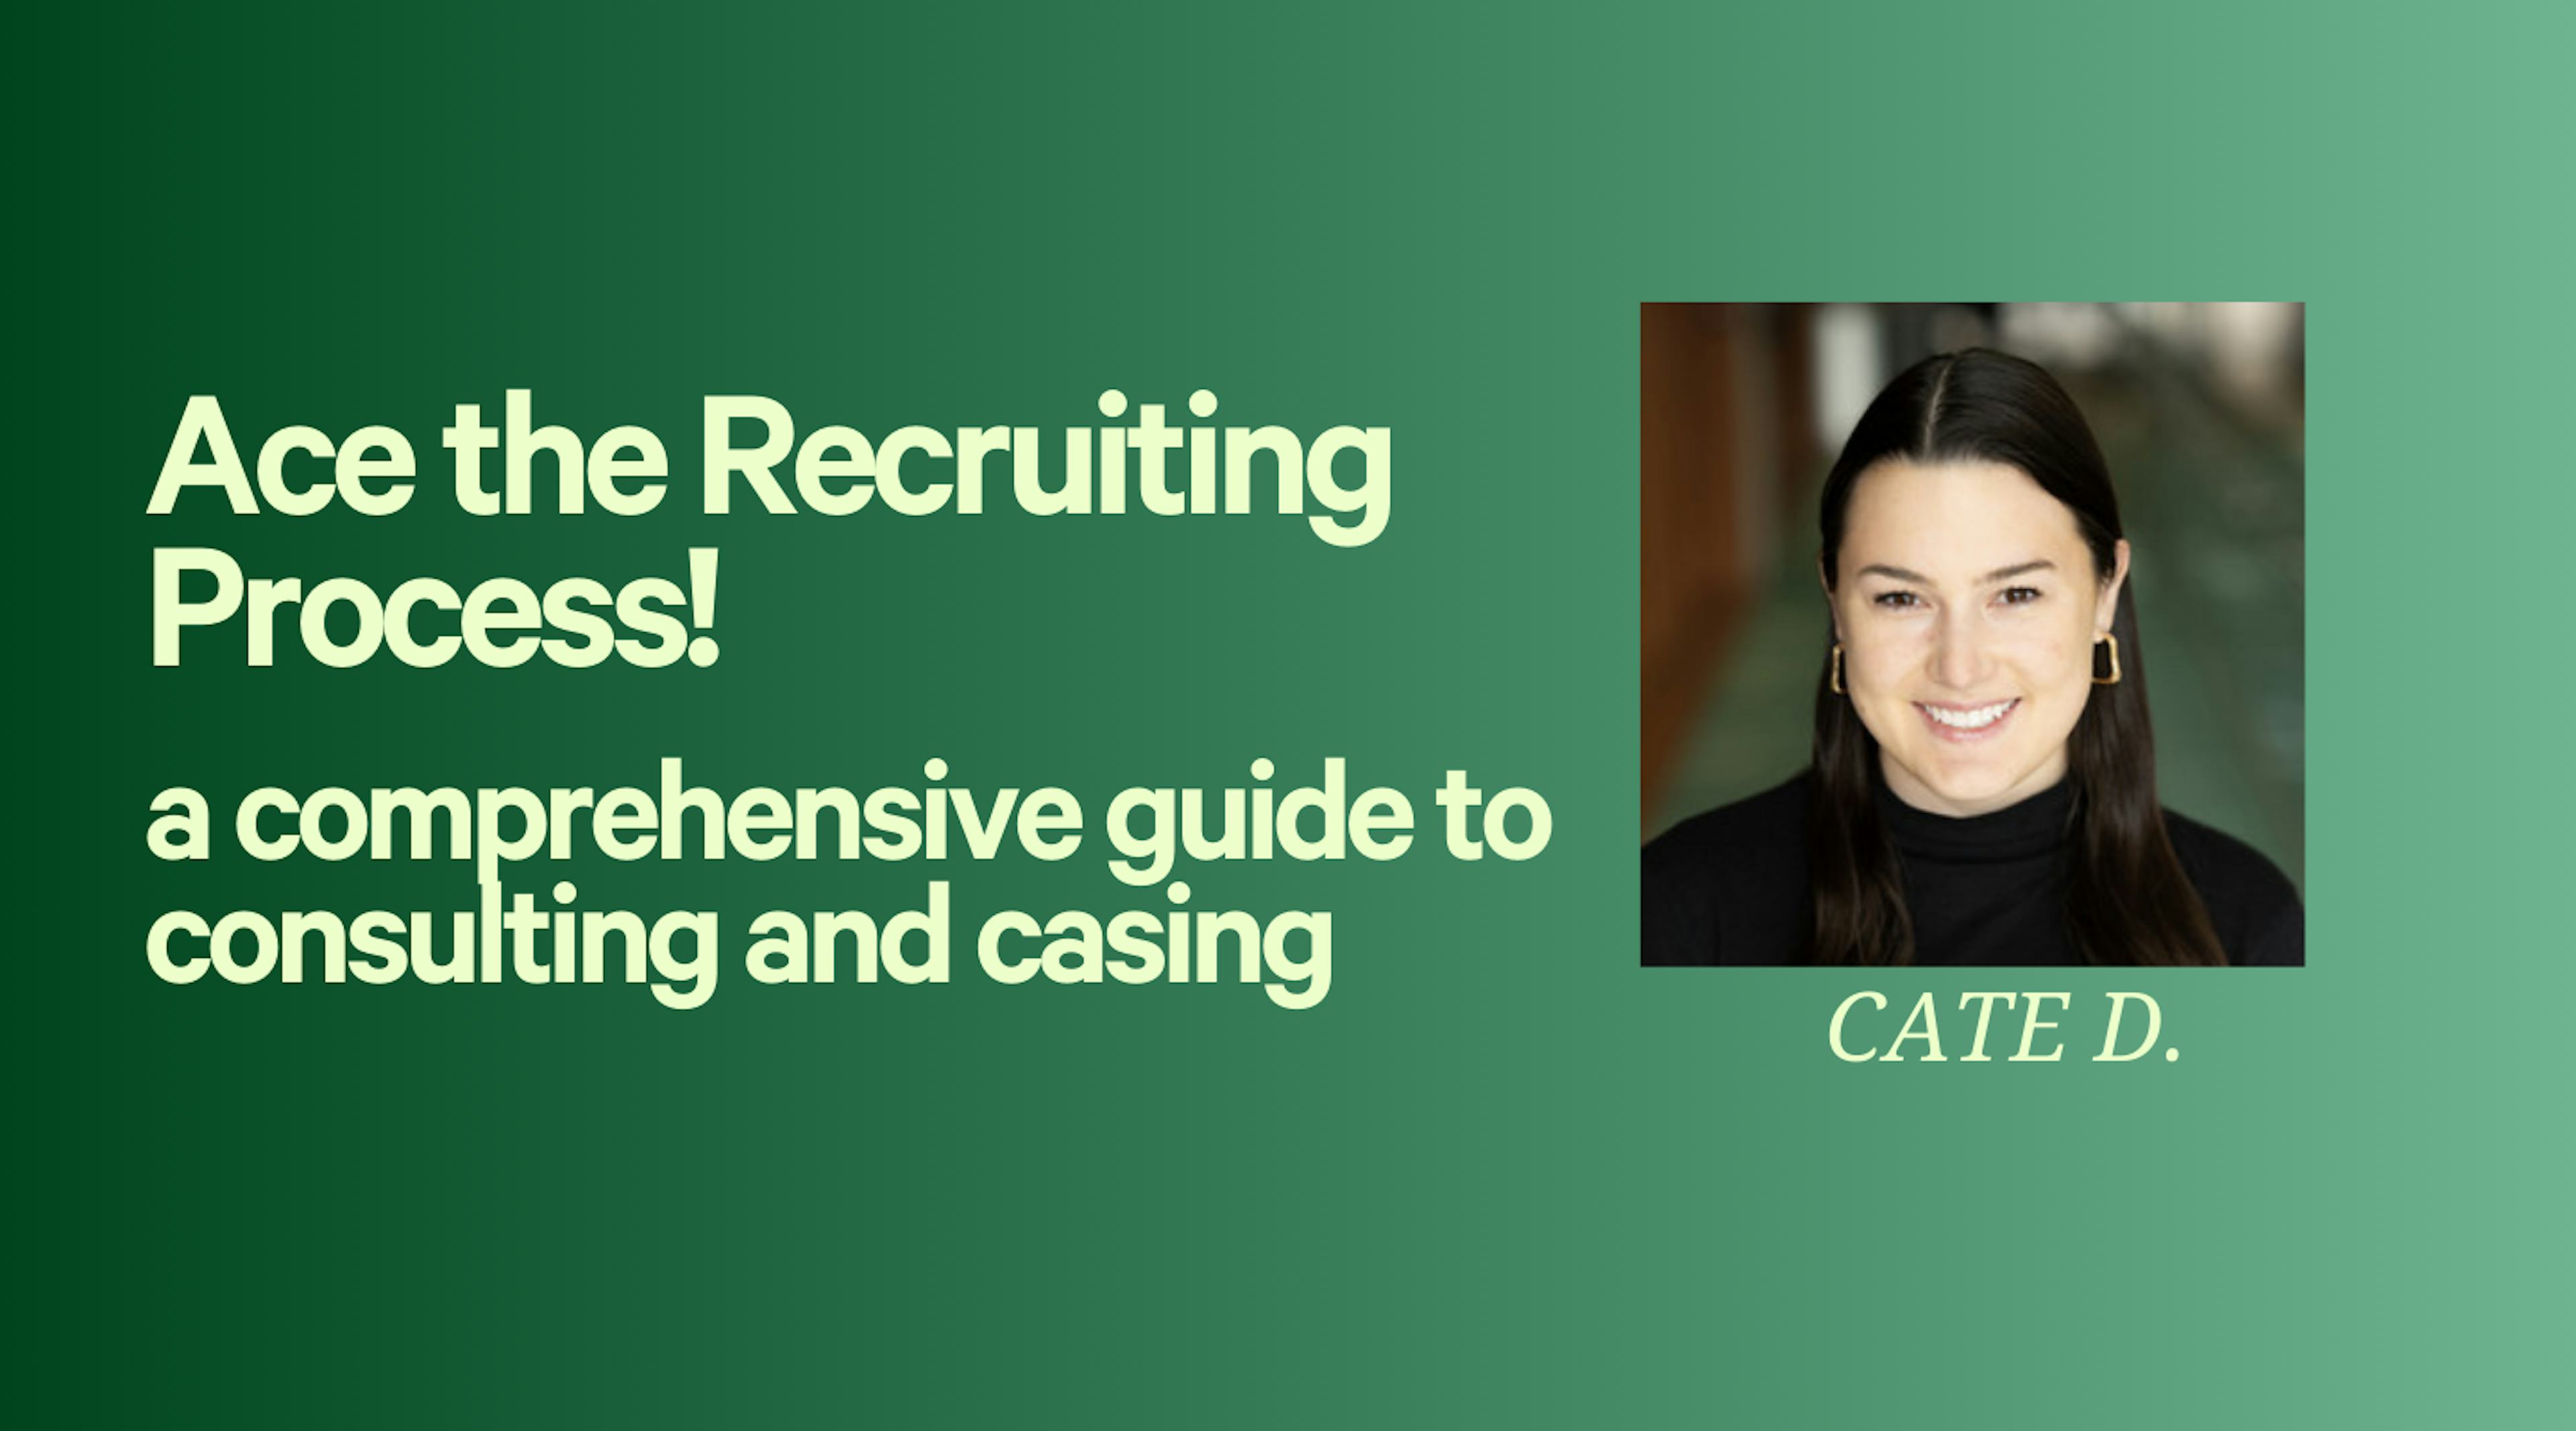 All about Consulting and Casing - Systems to Ace Your Recruiting Process